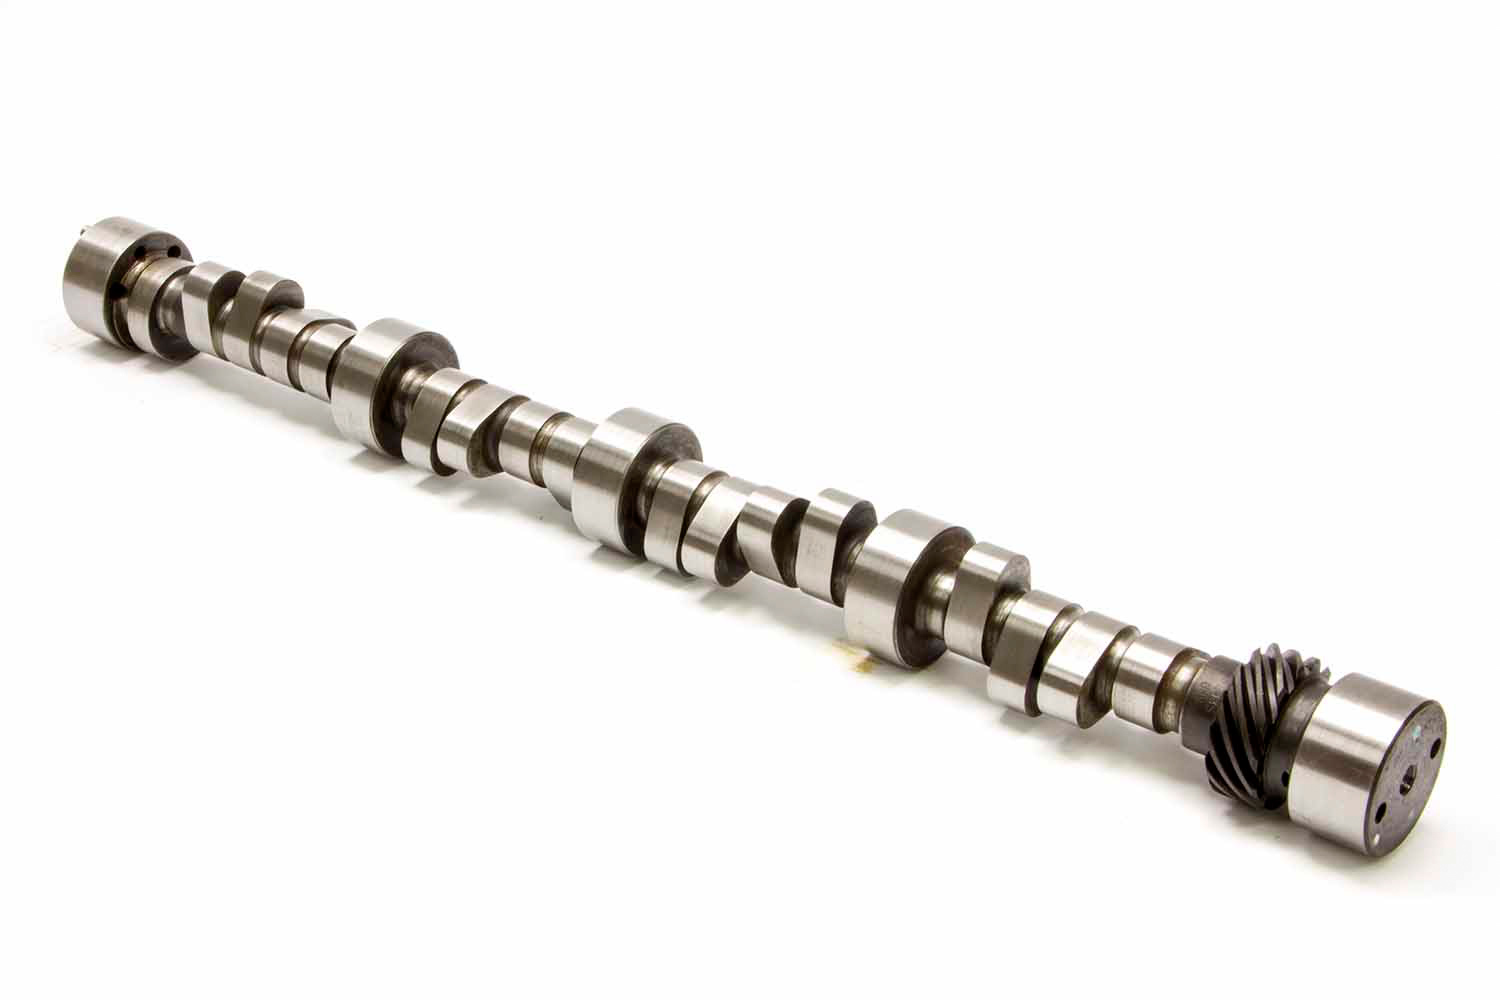 Lunati Cams 40120732 Camshaft, Voodoo, Mechanical Roller, Lift 0.578 / 0.585 in, Duration 273 / 279, 110 LSA, 2500 / 6800 RPM, Small Block Chevy, Each